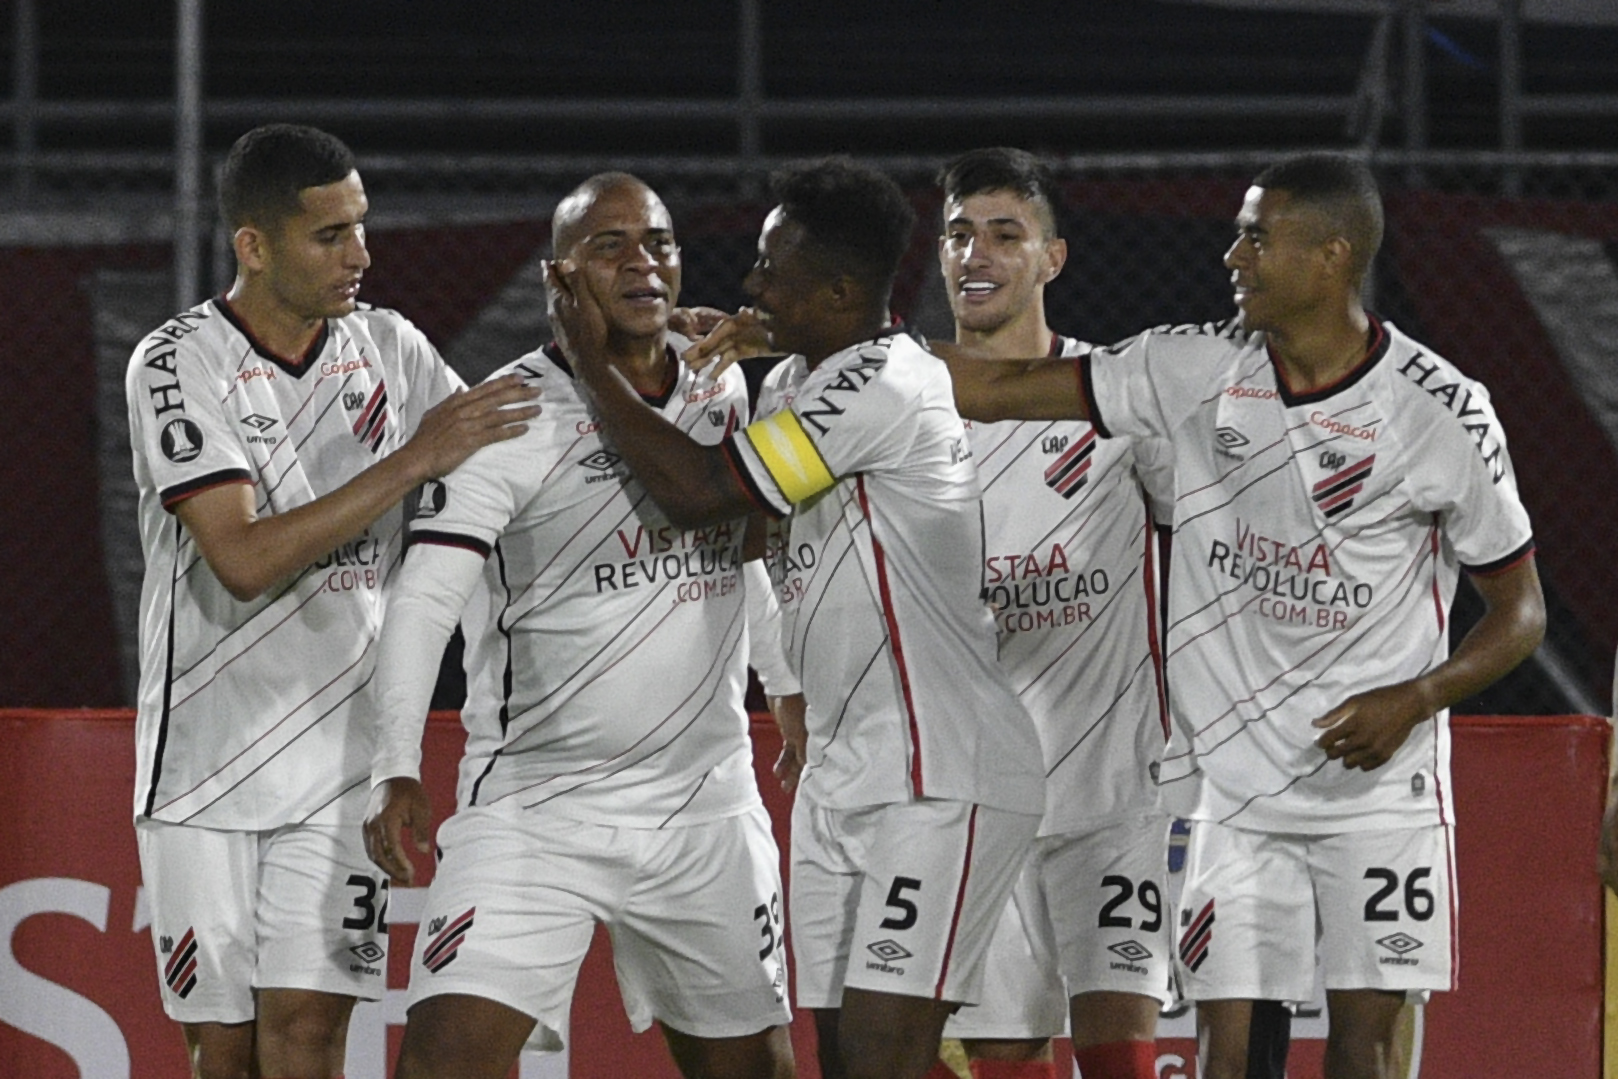 Brazil's Athletico Paranaense forward Walter (2nd L) celebrates with teammates after scoring against Bolivia's Jorge Wilstermann, during their closed-door Copa Libertadores group phase football match at the Felix Capriles stadium in Cochabamba, Bolivia, on September 15, 2020, amid the COVID-19 novel coronavirus pandemic. (Photo by AIZAR RALDES / AFP) (Photo by AIZAR RALDES/AFP via Getty Images)